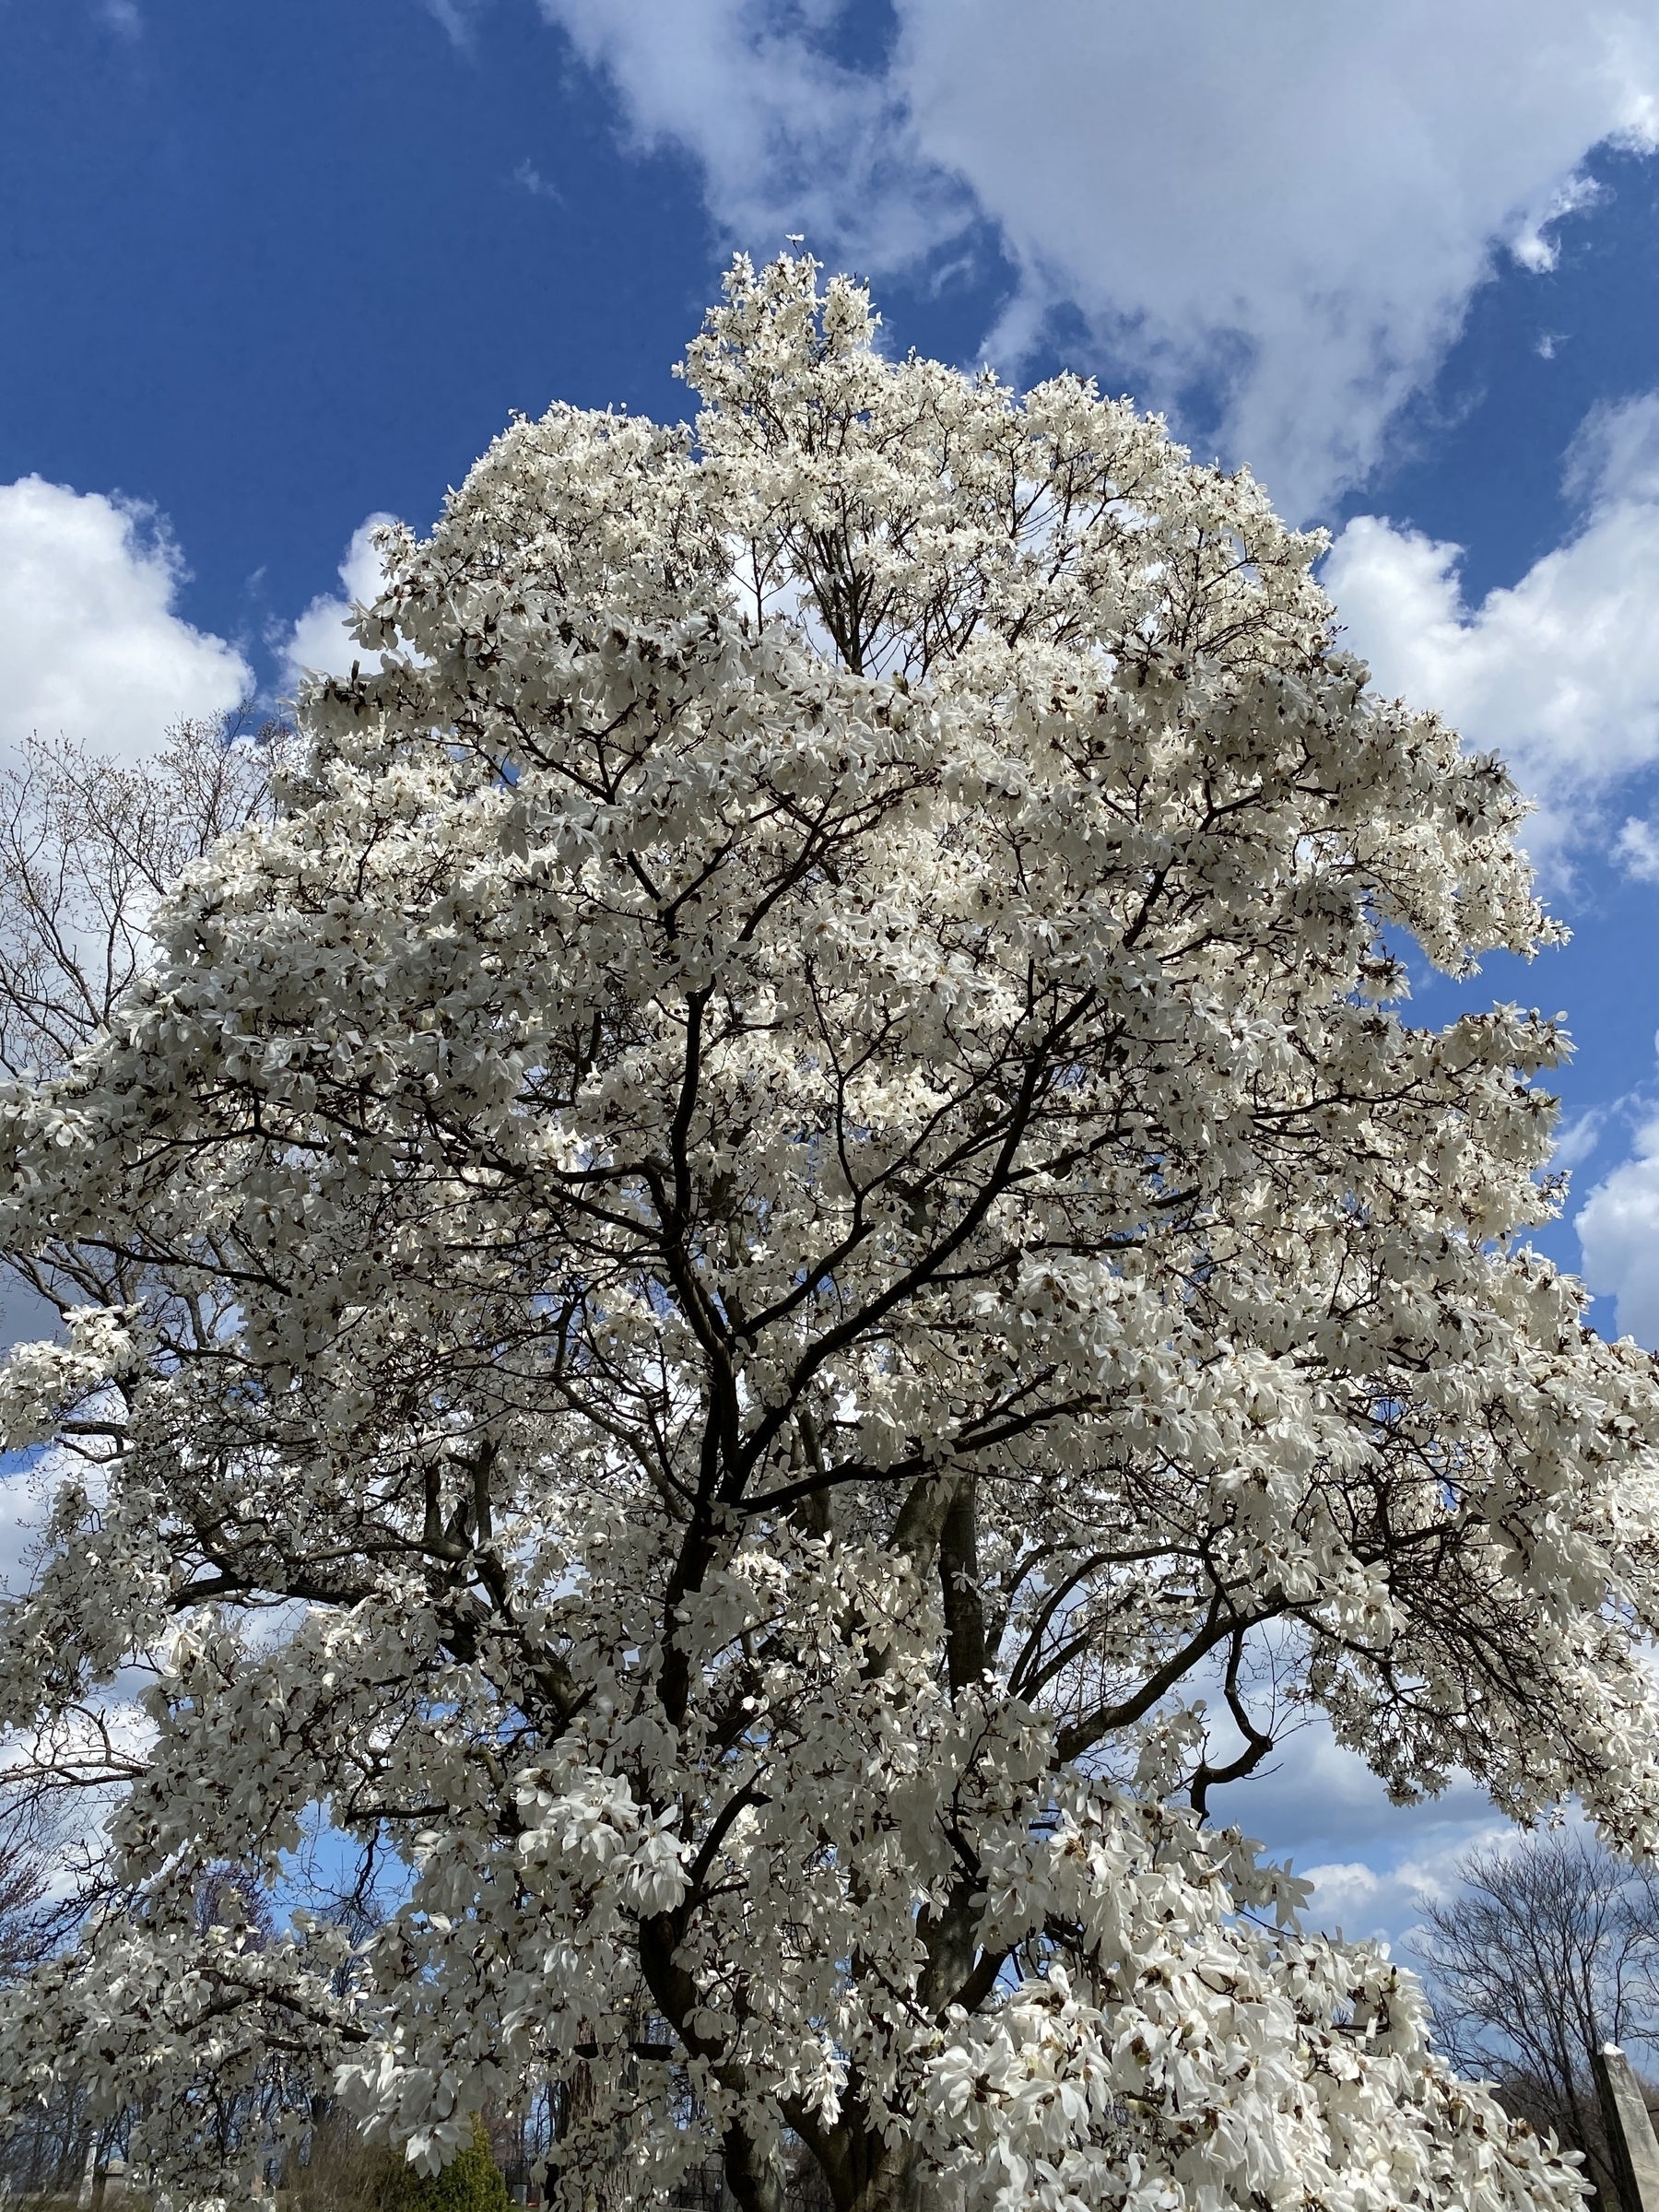 Tree covered in white flowers.